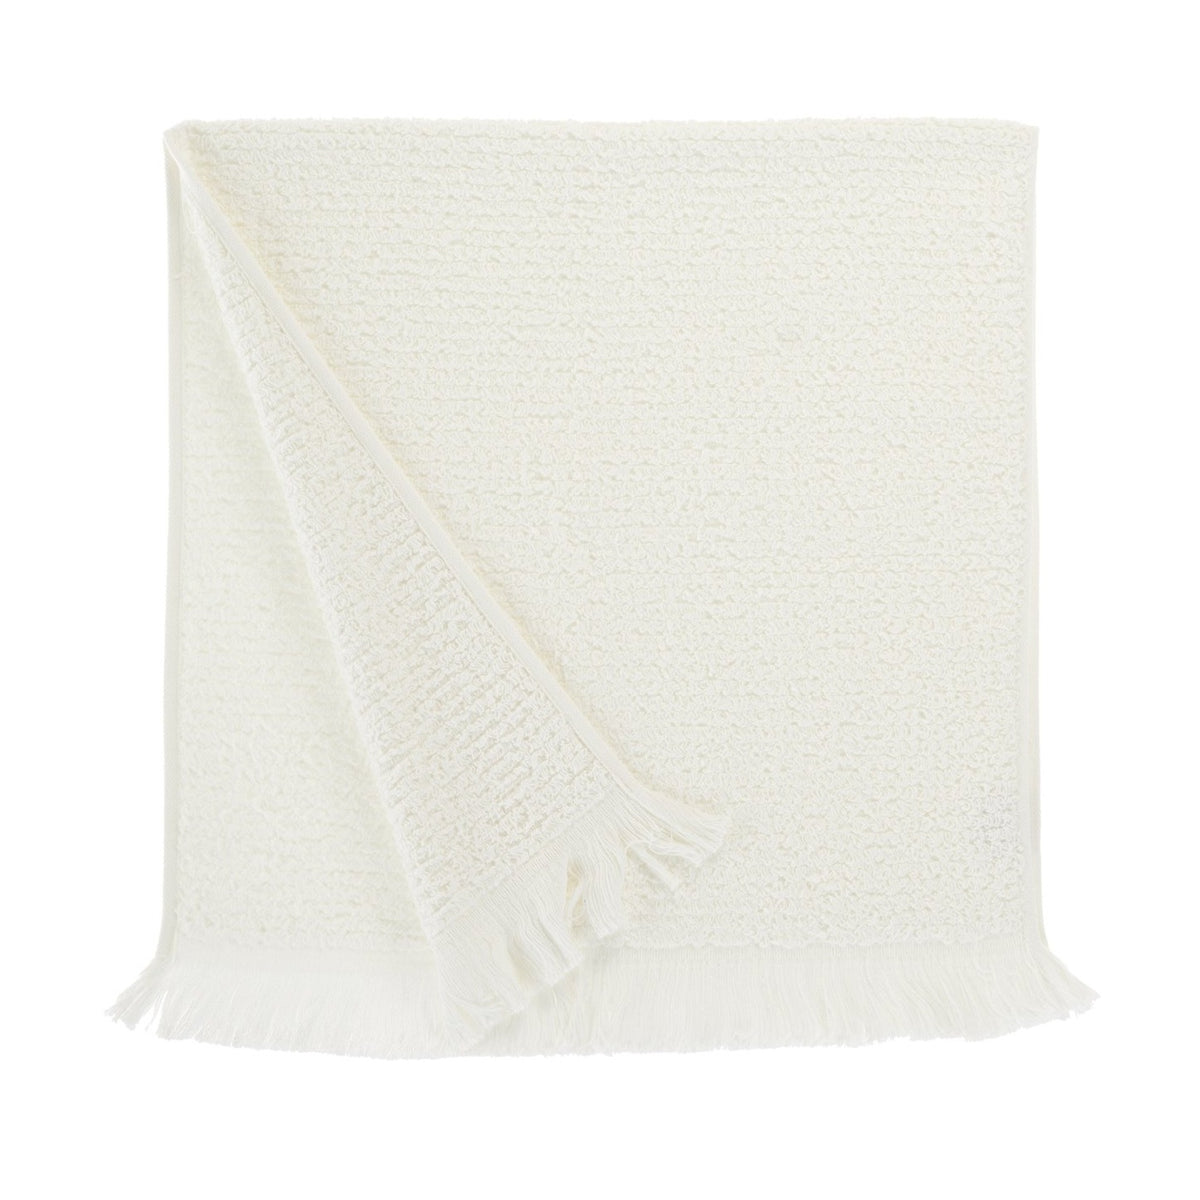 Sale - Athena, Terry Towel, Extra Long Loops, Off White